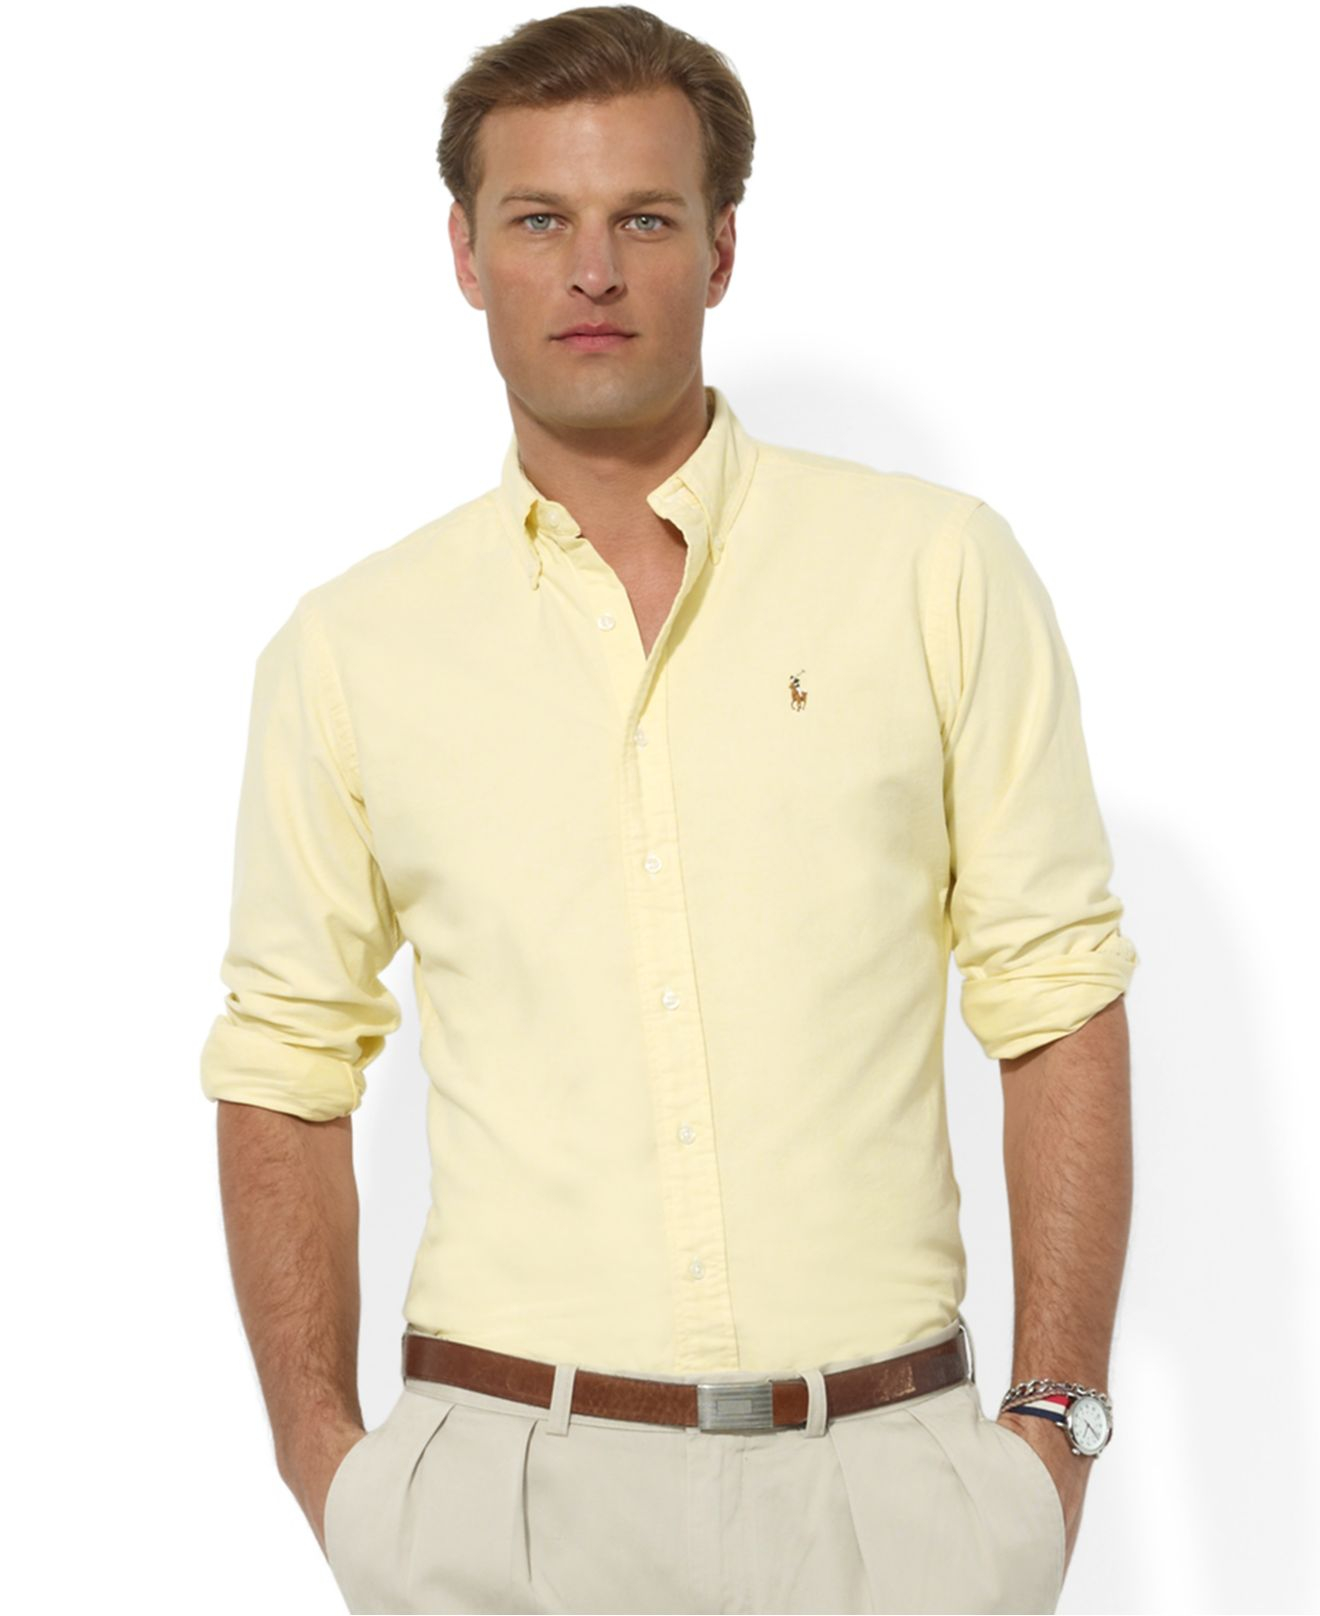 Lyst - Polo ralph lauren Core Classic Fit Oxford Shirt in Yellow for Men